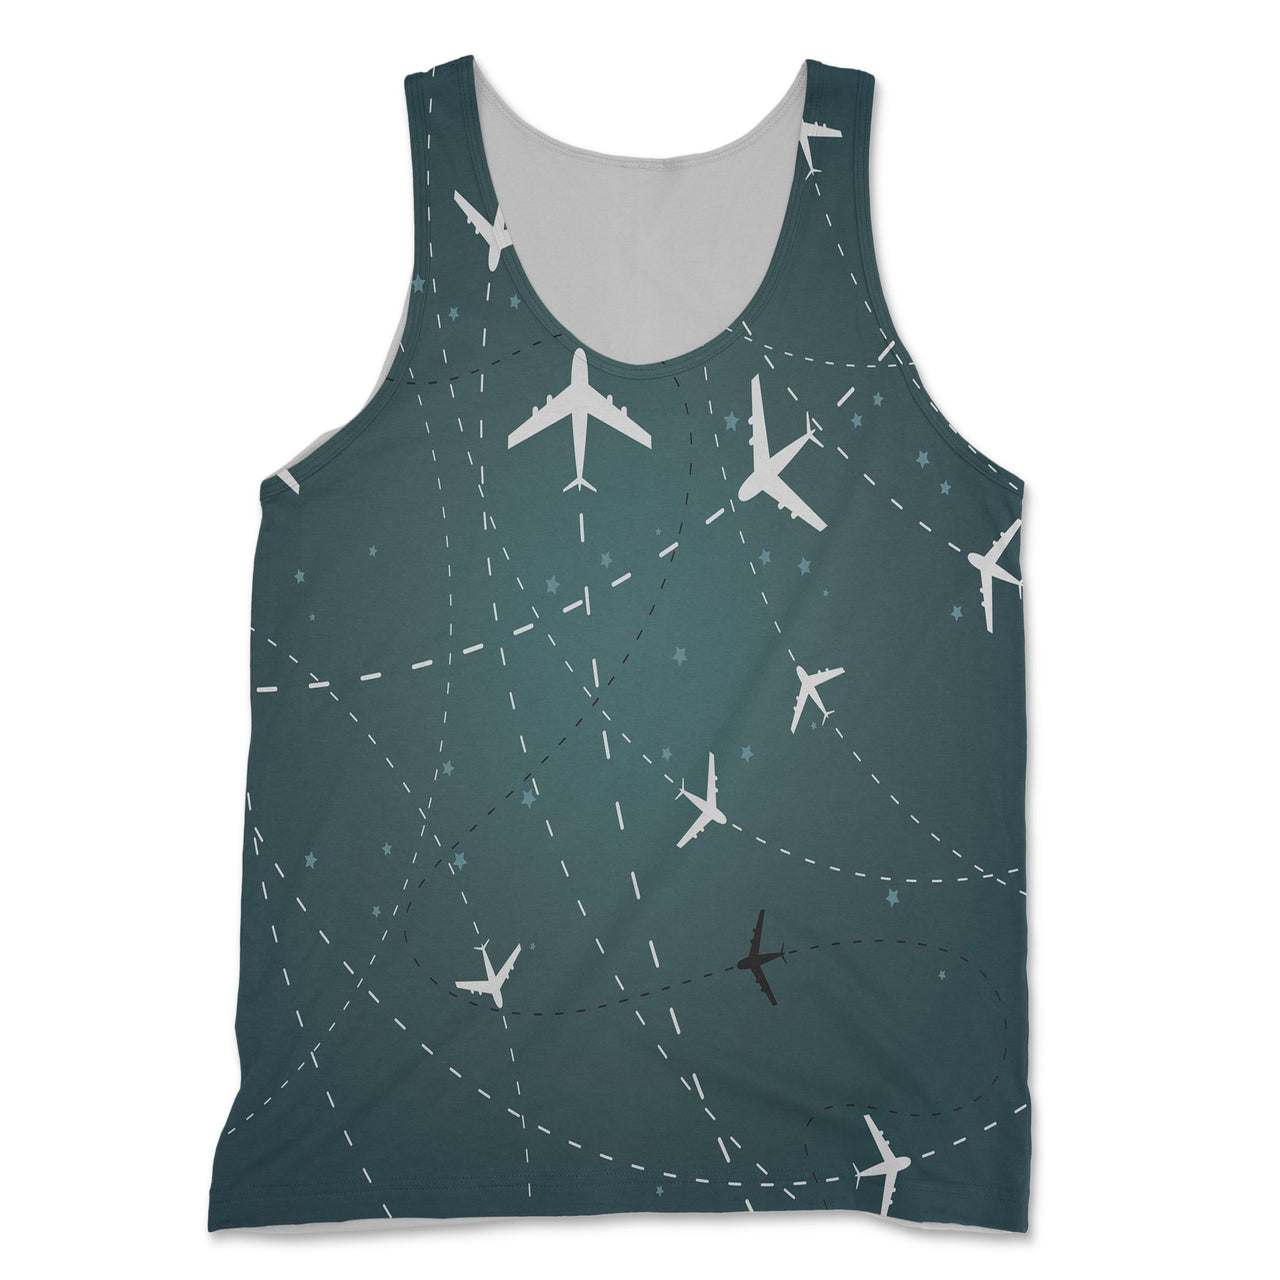 Travelling with Aircraft (Green) Designed 3D Tank Tops